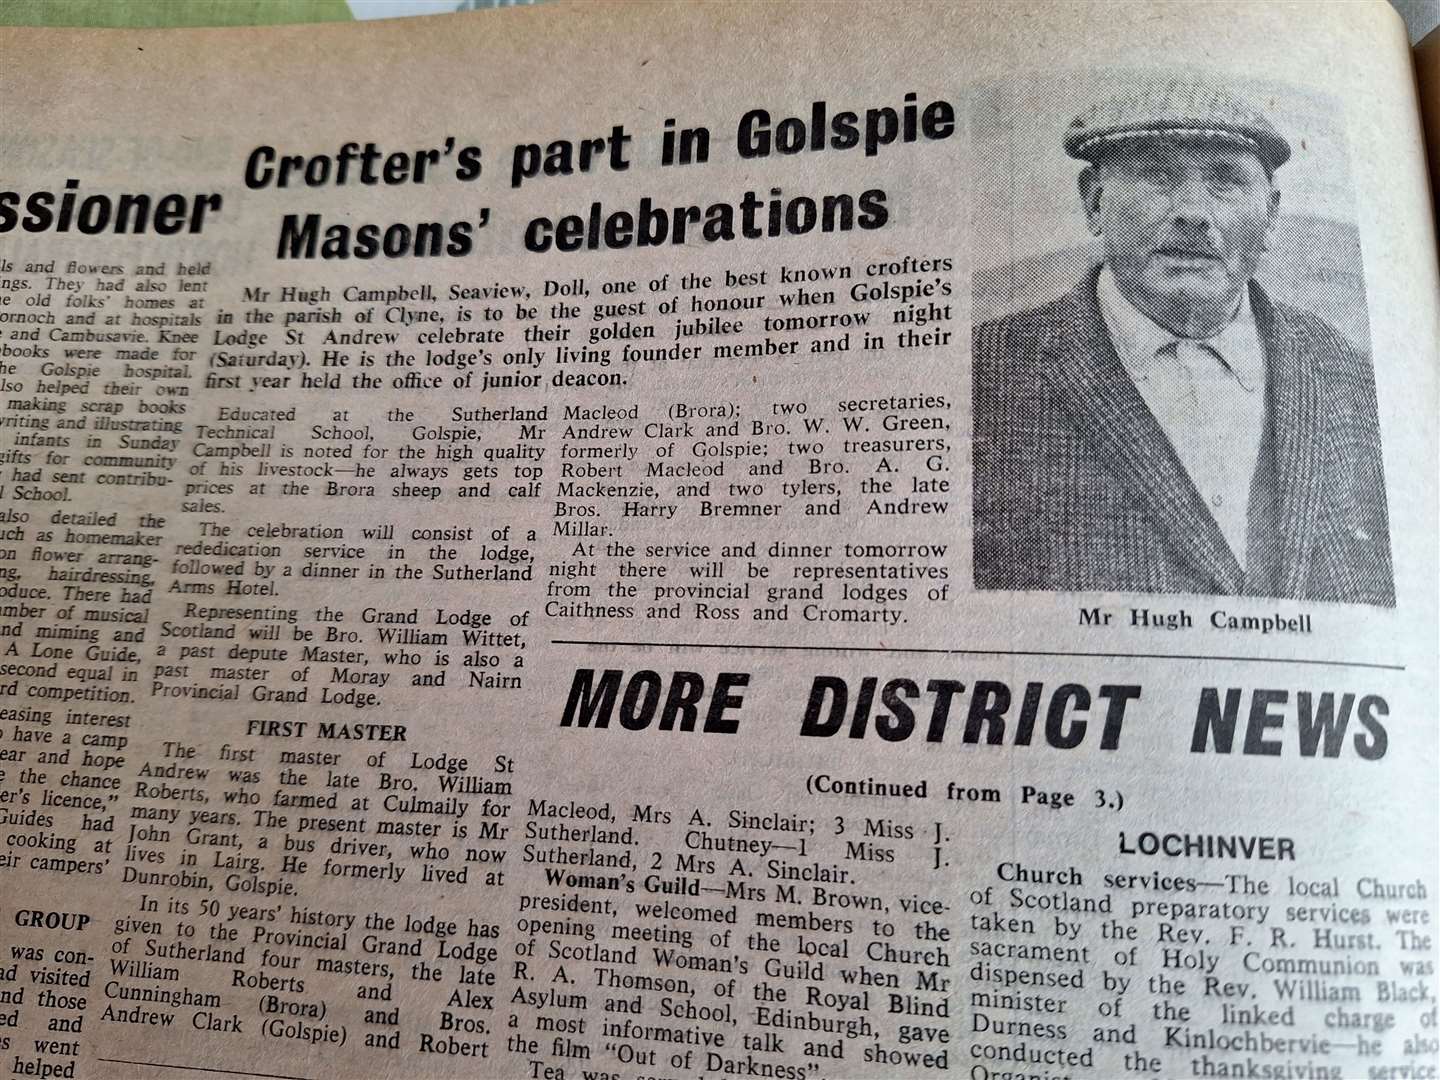 The article about Doll crofter Mr Hugh Campbell in the November 2, 1973, edition of the Northern Times.